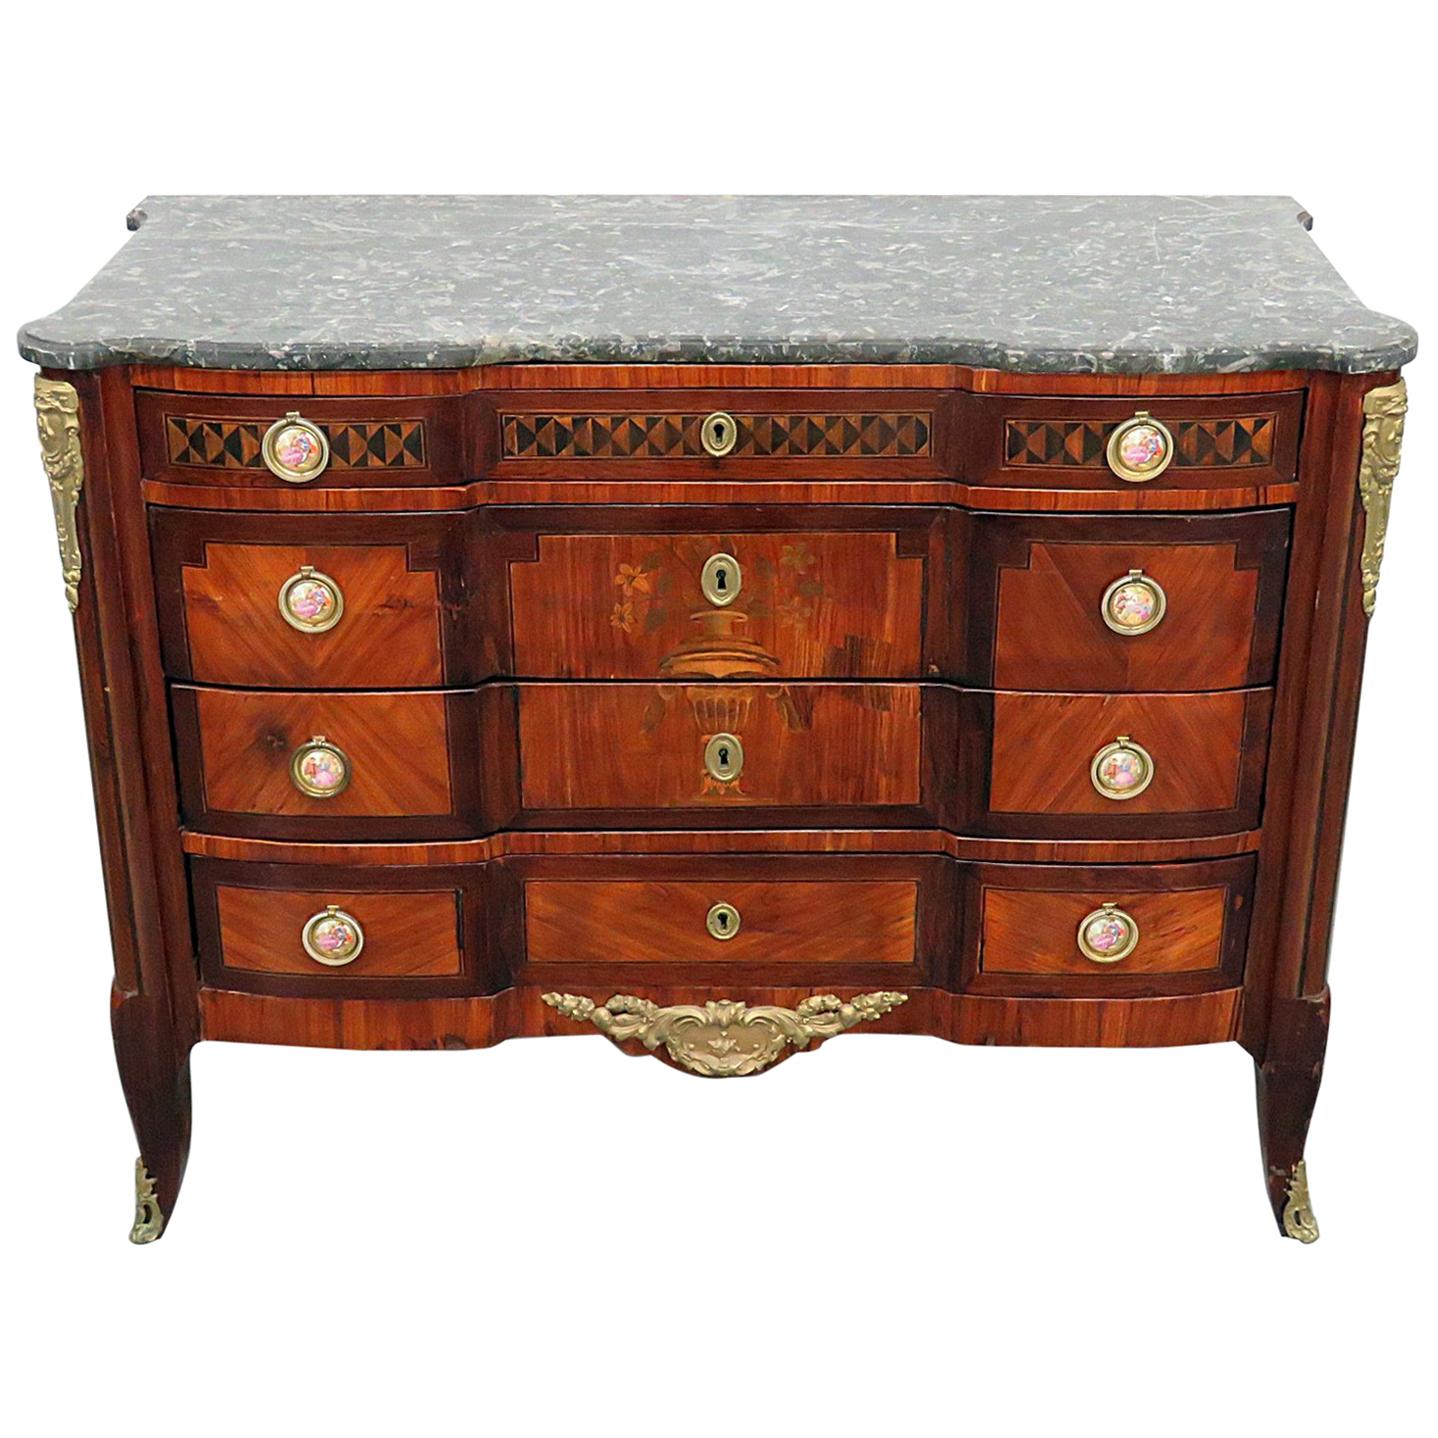 18th Century French Empire Style Inlaid Marble-Top Commode